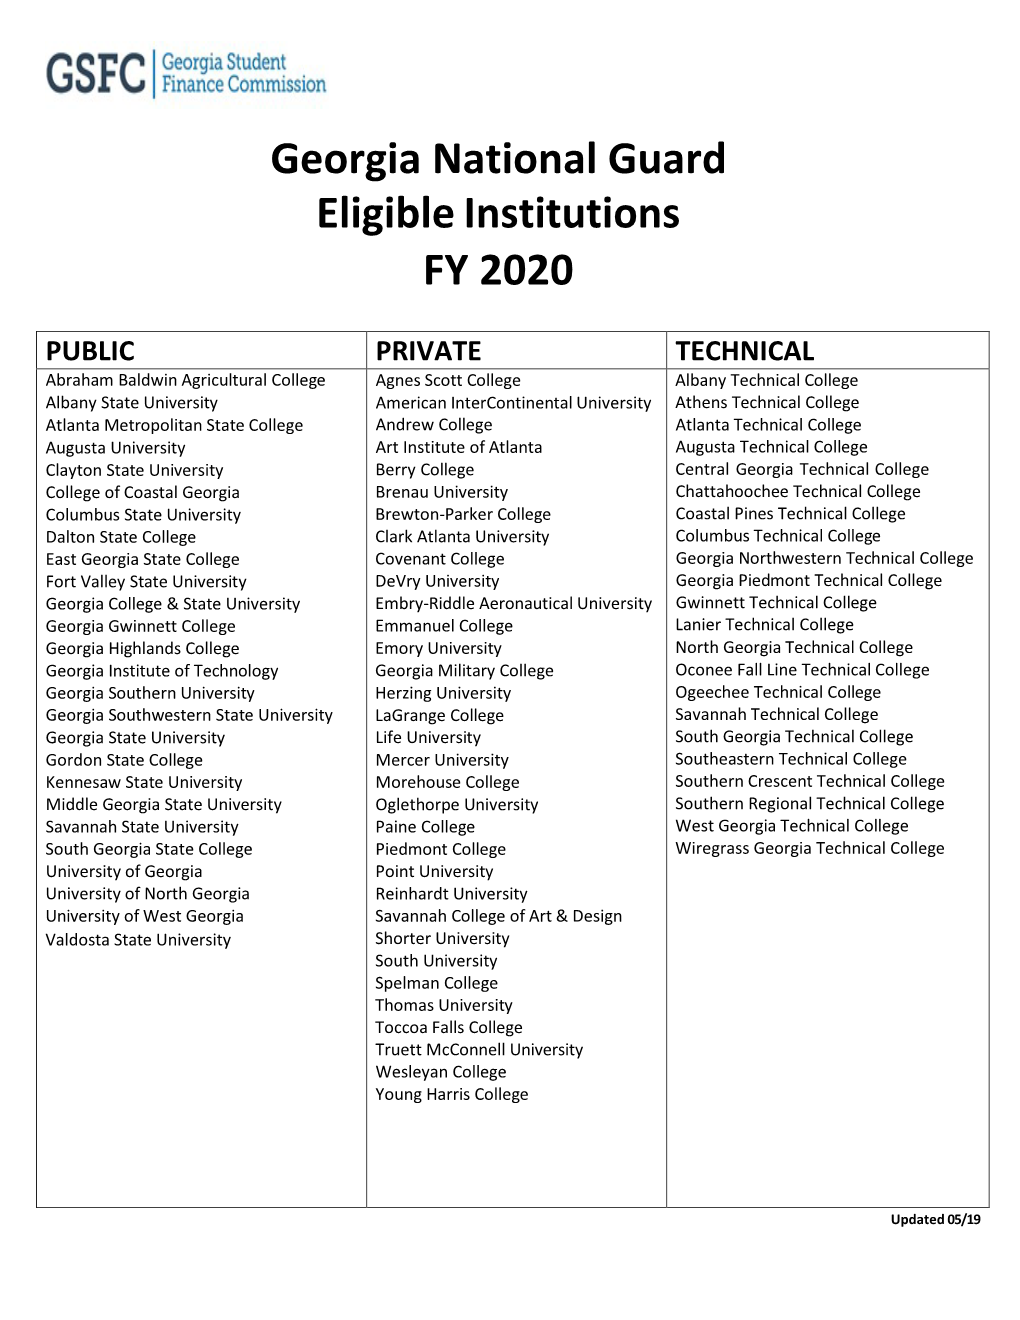 Georgia National Guard Eligible Institutions FY 2020